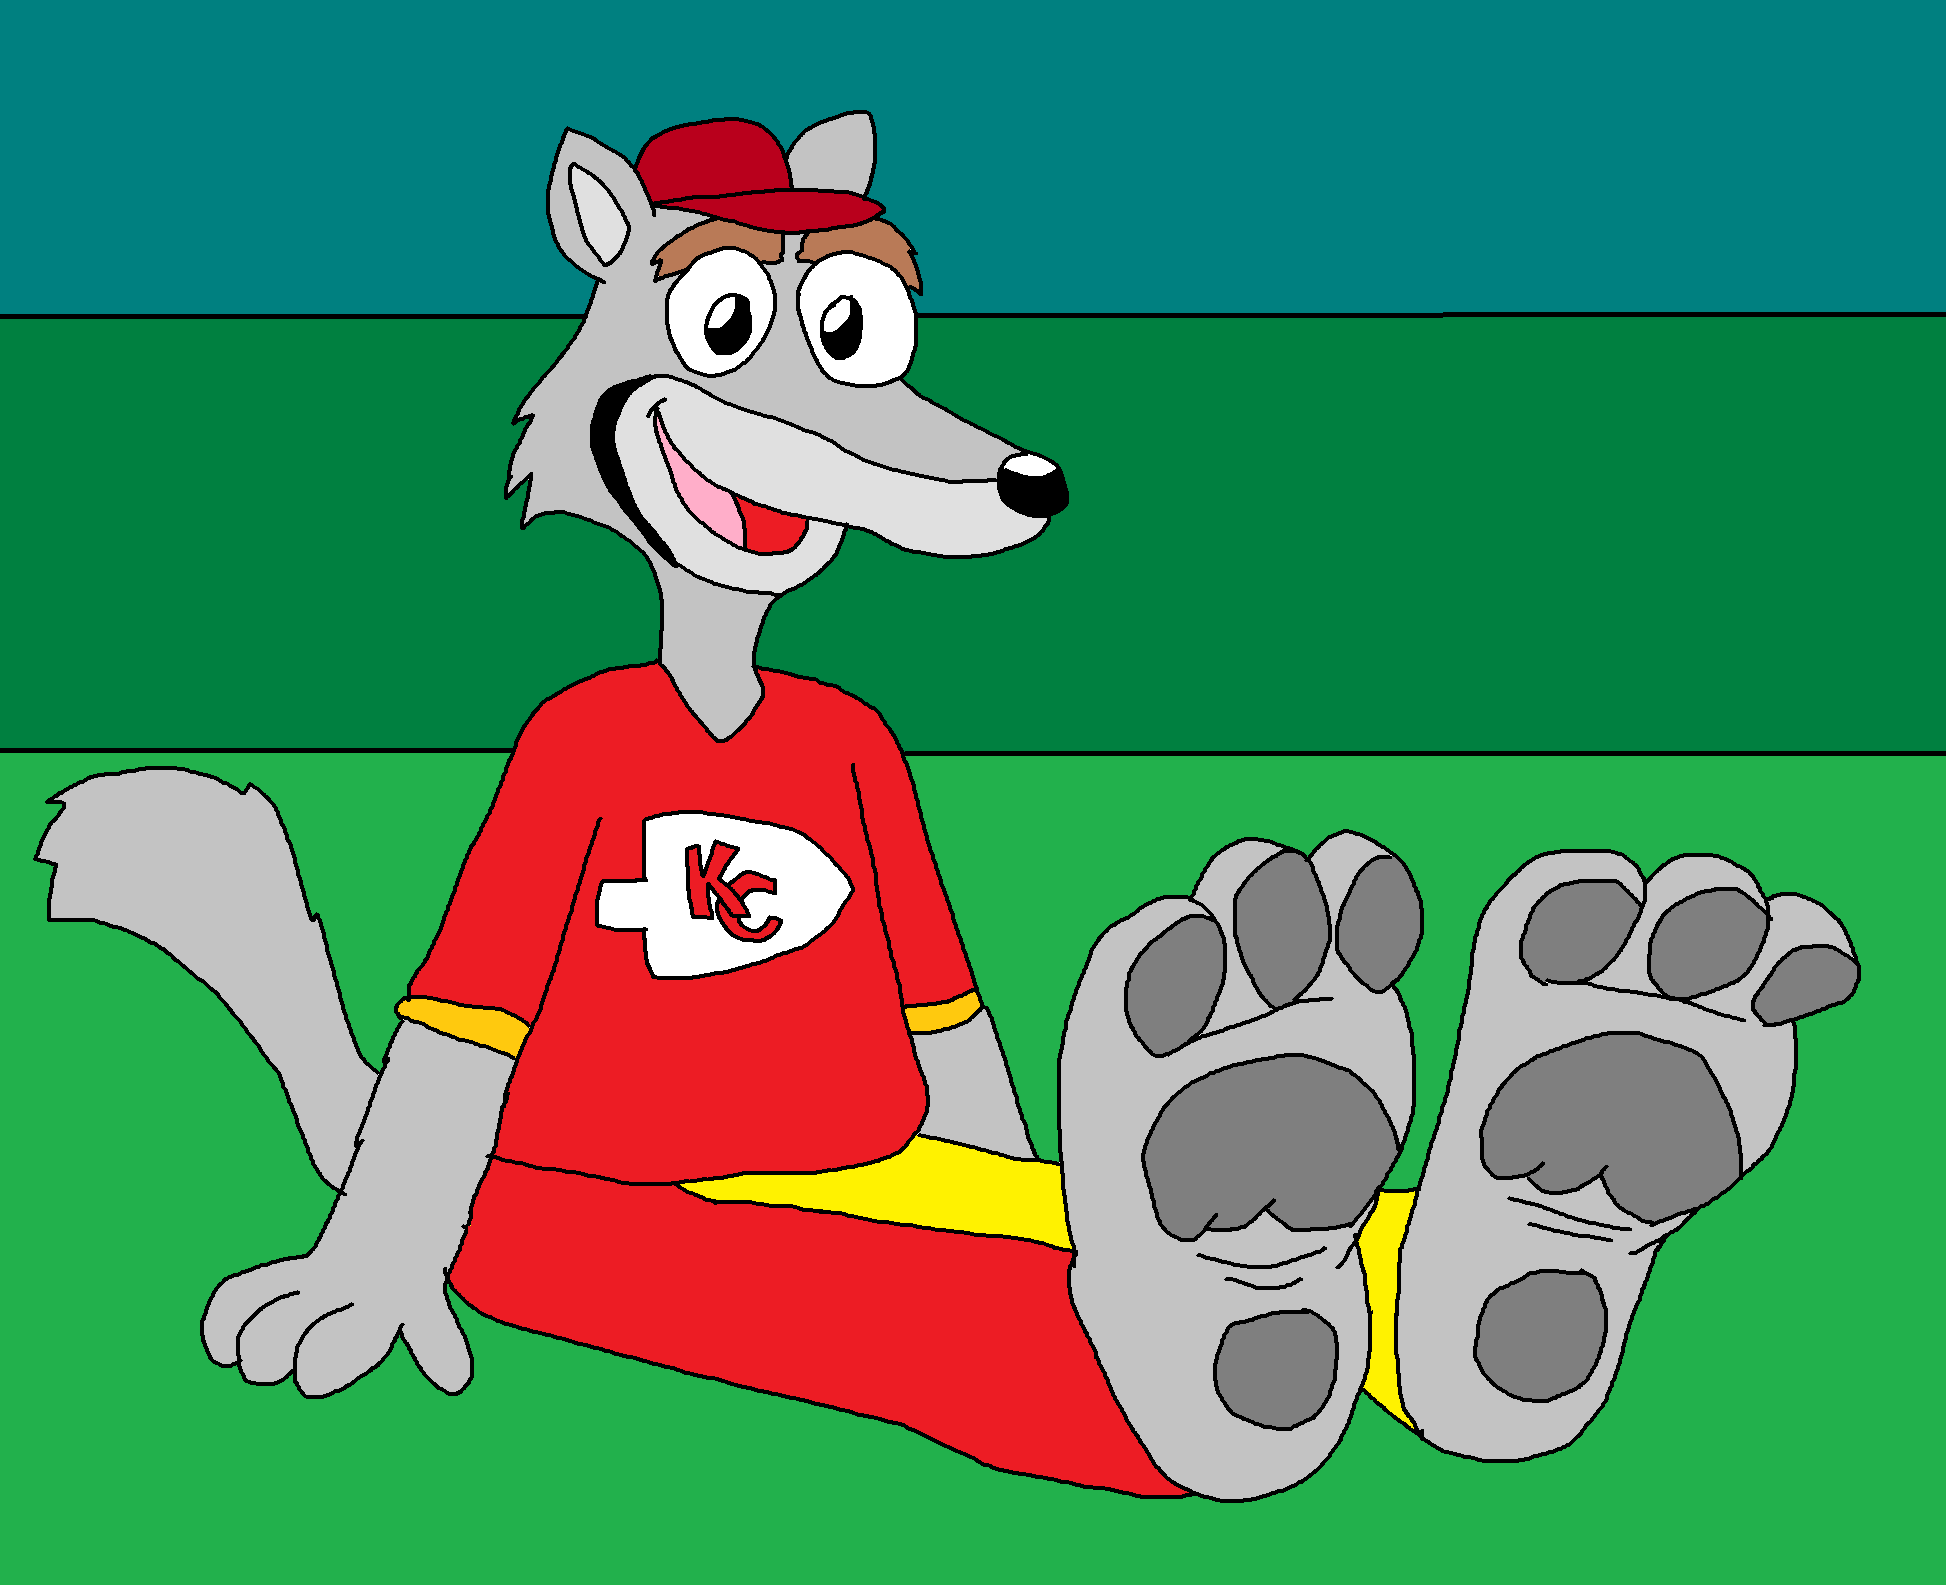 Kansas City Chiefs Mascot Wants To Be 'The Hands And Feet Of Jesus